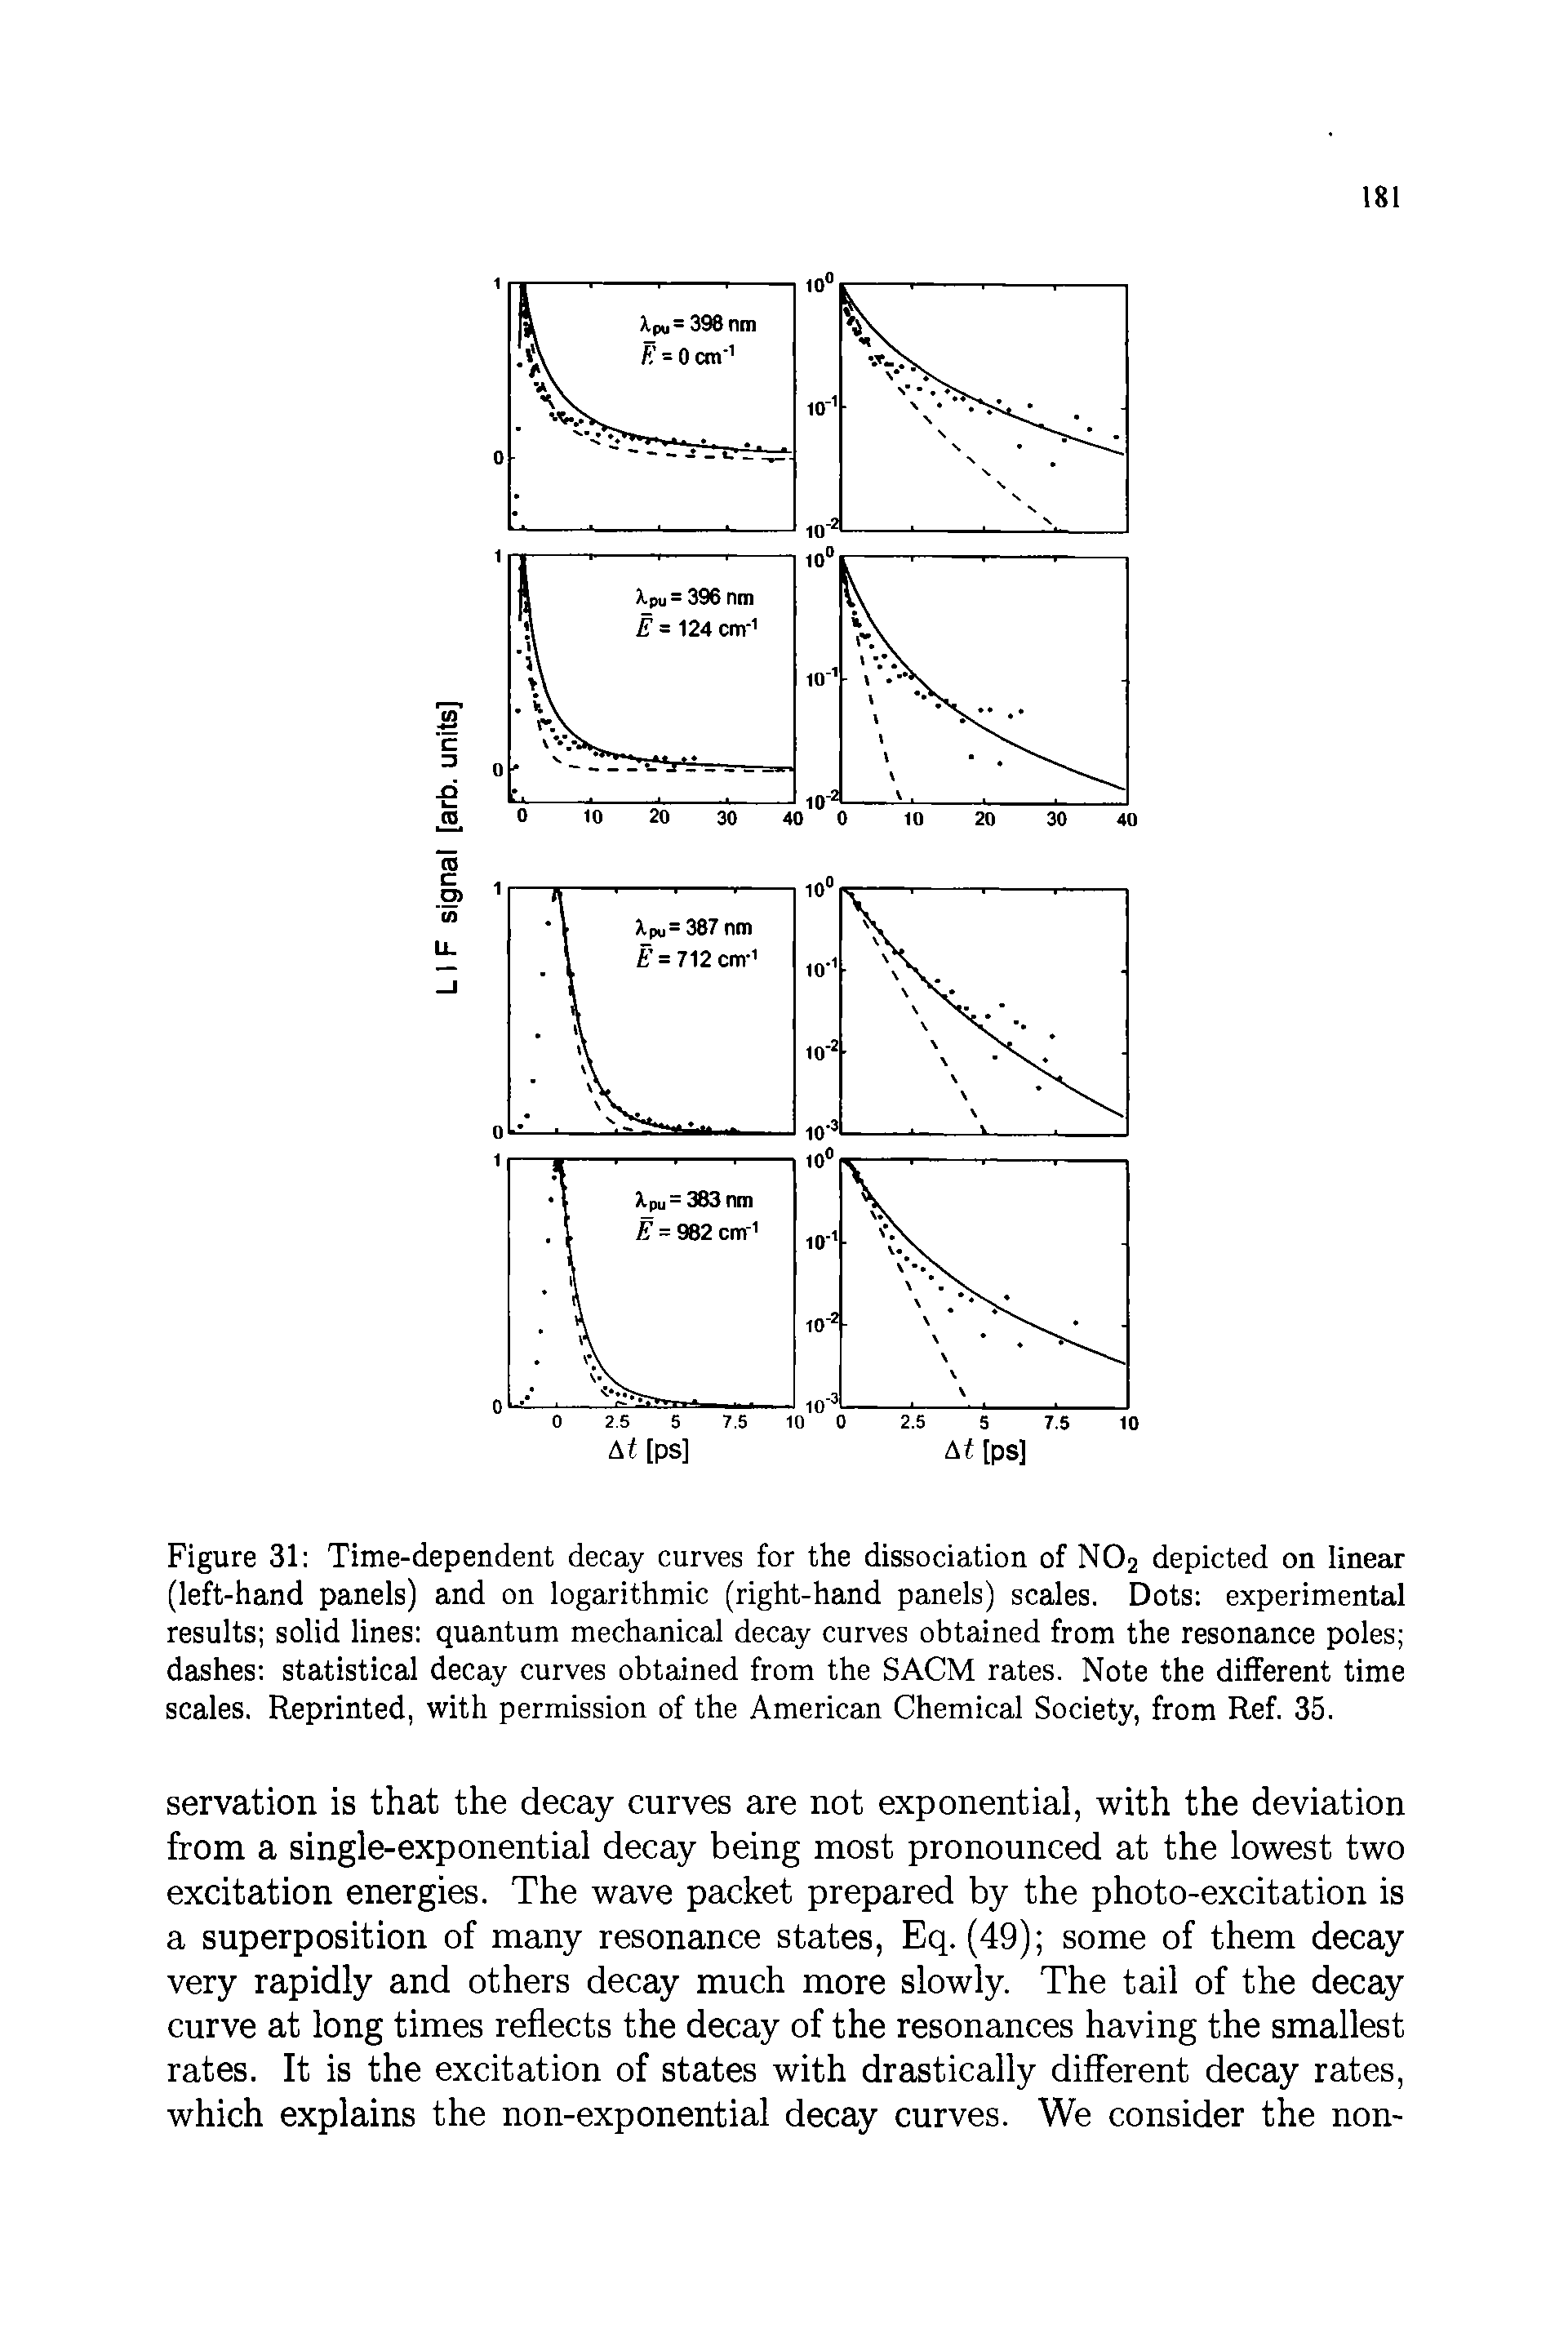 Figure 31 Time-dependent decay curves for the dissociation of NO2 depicted on linear (left-hand panels) and on logarithmic (right-hand panels) scales. Dots experimental results solid lines quantum mechanical decay curves obtained from the resonance poles dashes statistical decay curves obtained from the SACM rates. Note the different time scales. Reprinted, with permission of the American Chemical Society, from Ref. 35.